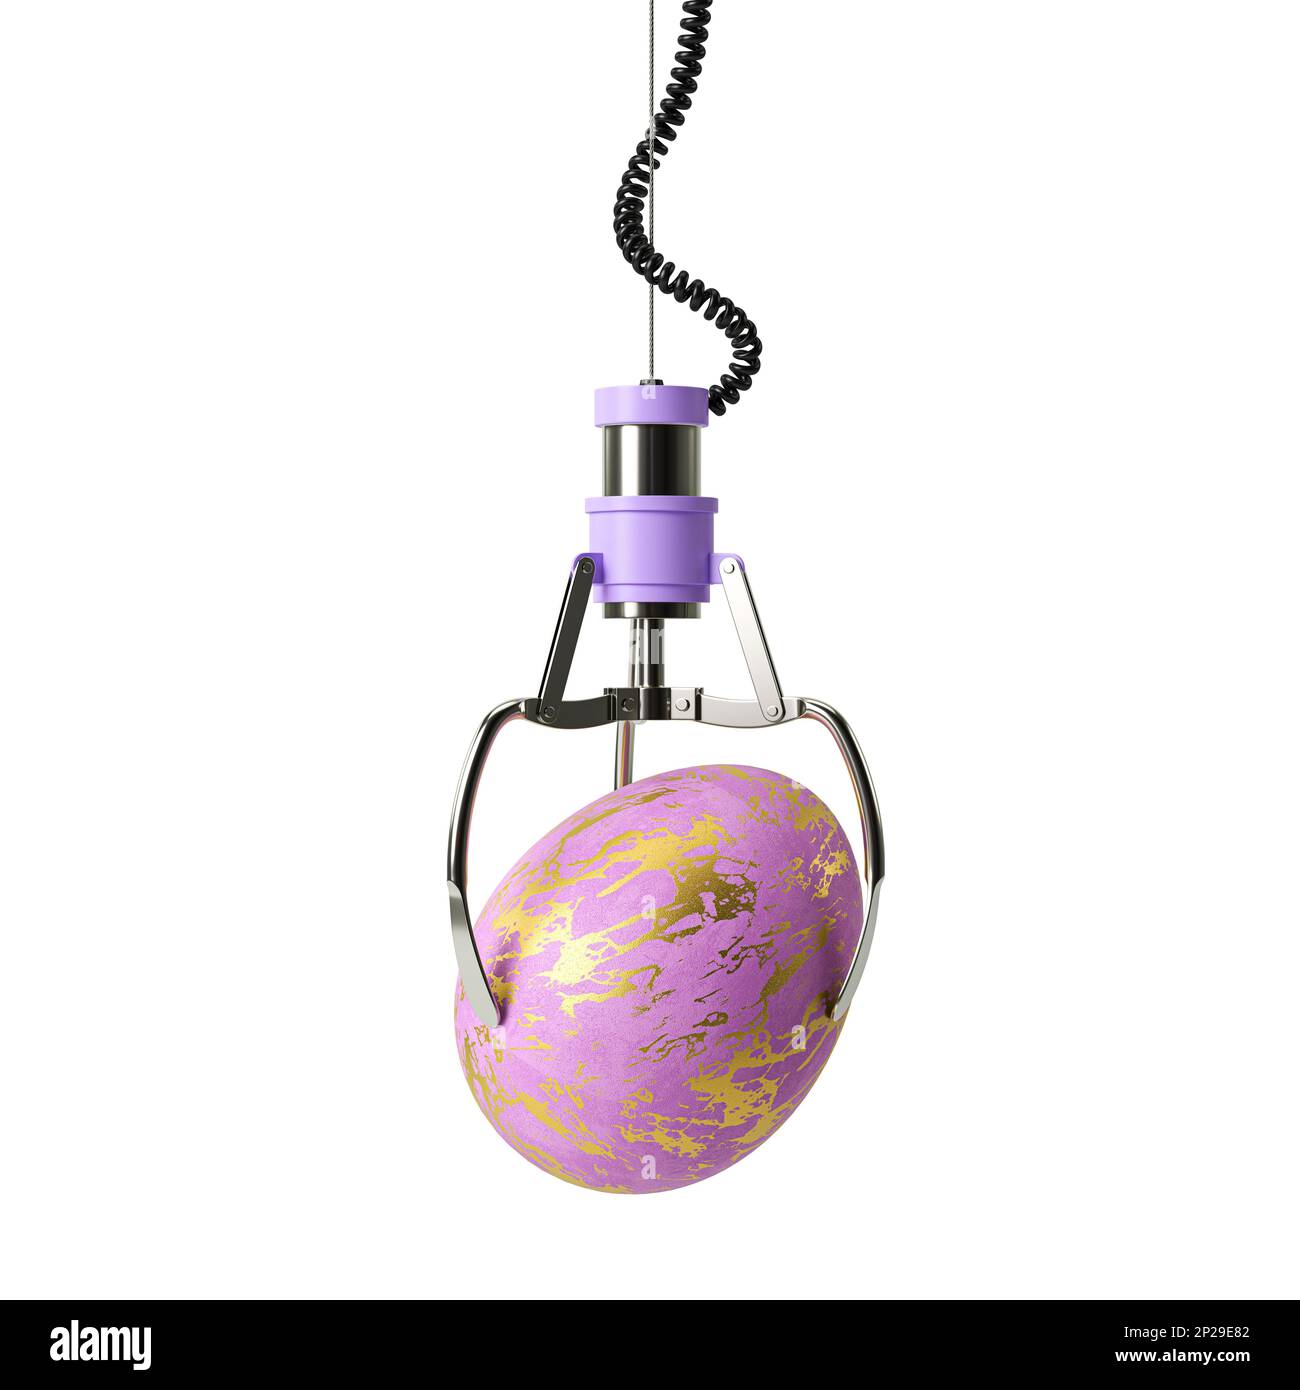 Purple robotic metal claw hold Purple Happy Easter egg with golden pattern. Isolated on a white background. 3d rendering Stock Photo